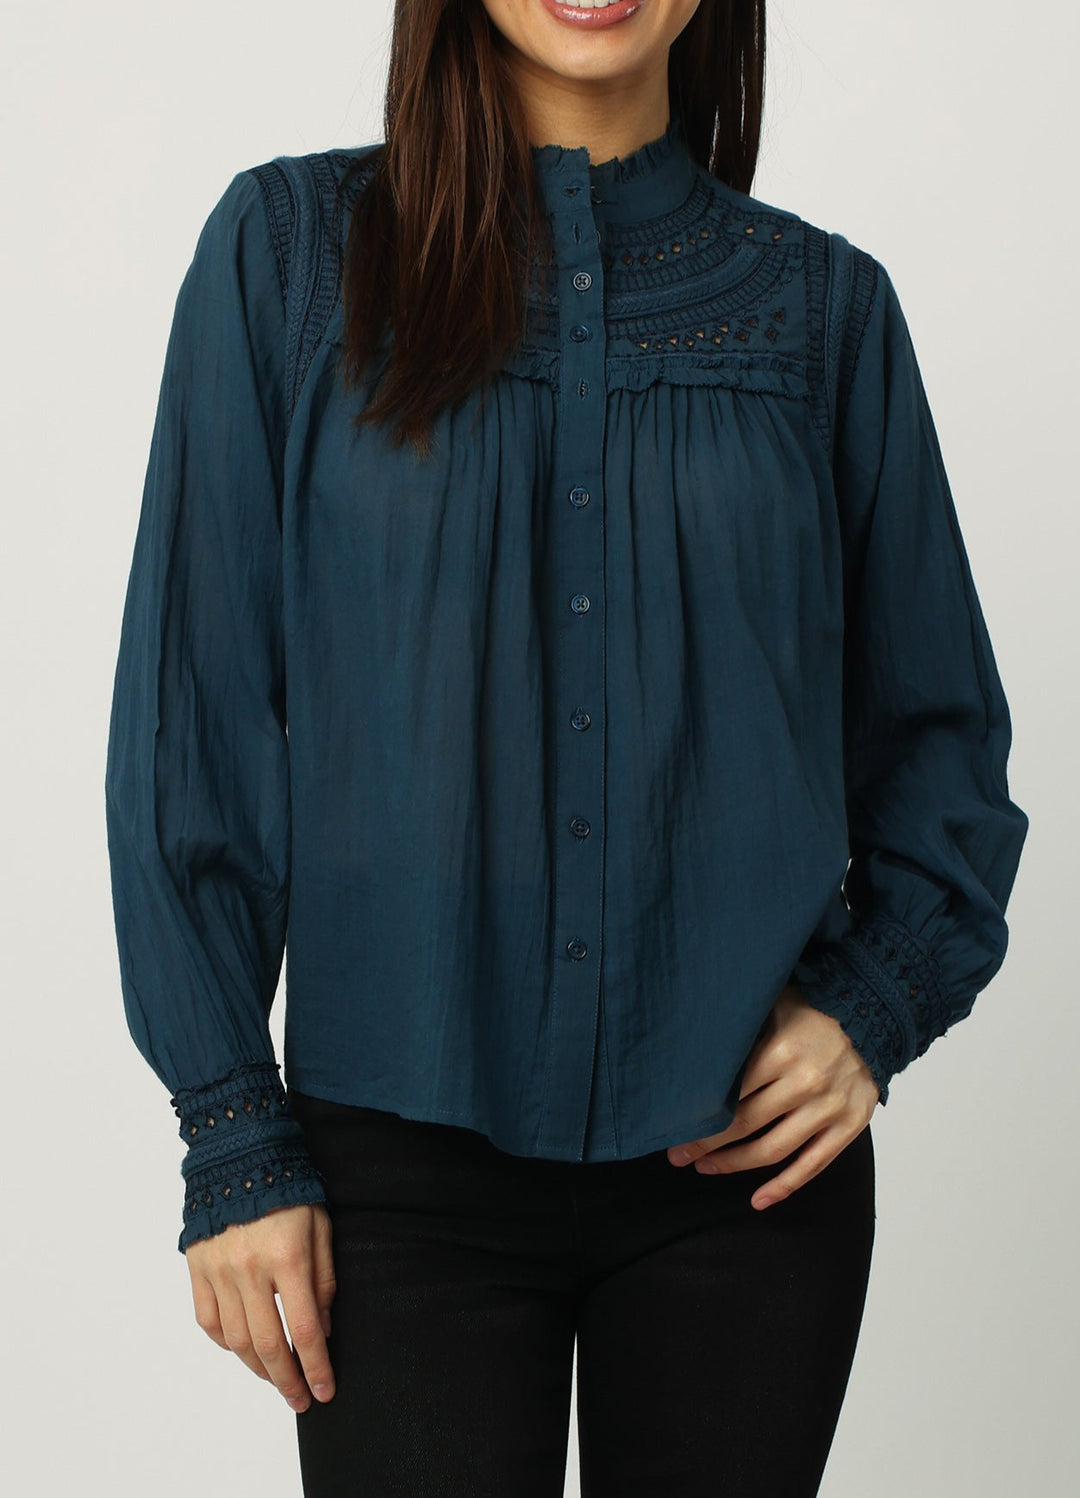 image of a female model wearing a KELLY EMBROIDERY DETAIL SHIRT FRENCH NAVY DEAR JOHN DENIM 